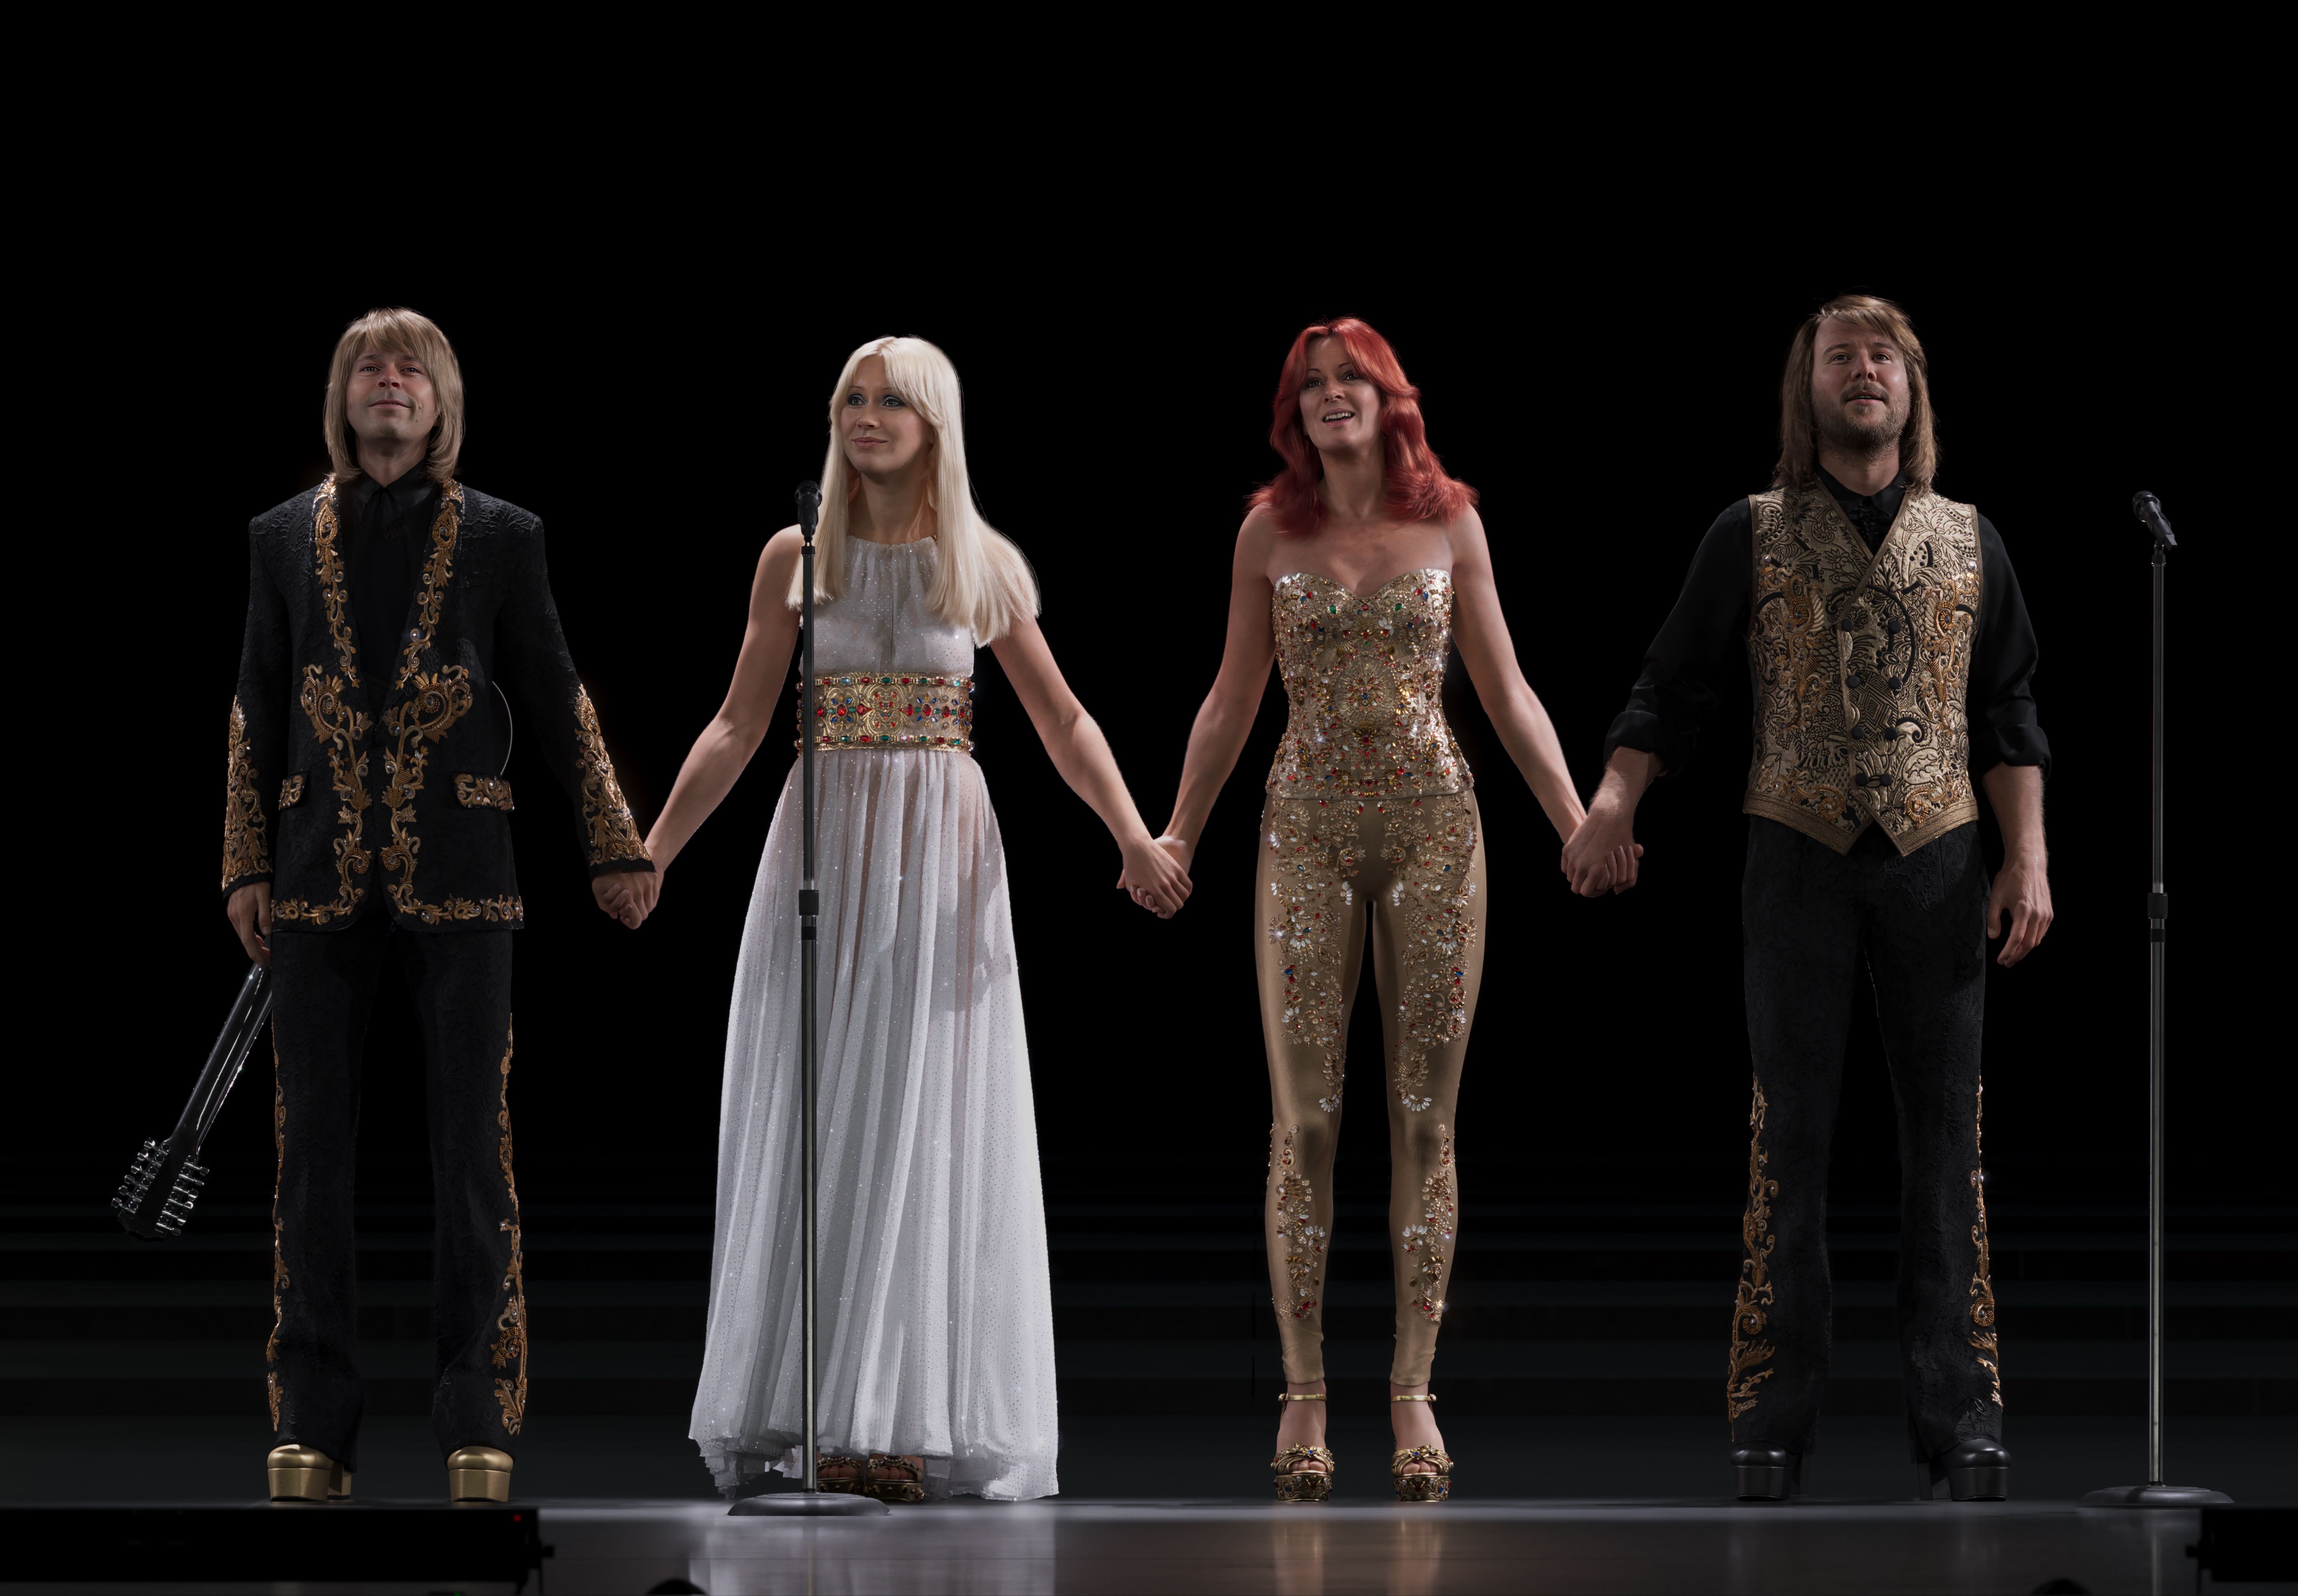 Film Making Without Dress - The Making of ABBA Voyage, According to the Mastermind Behind It